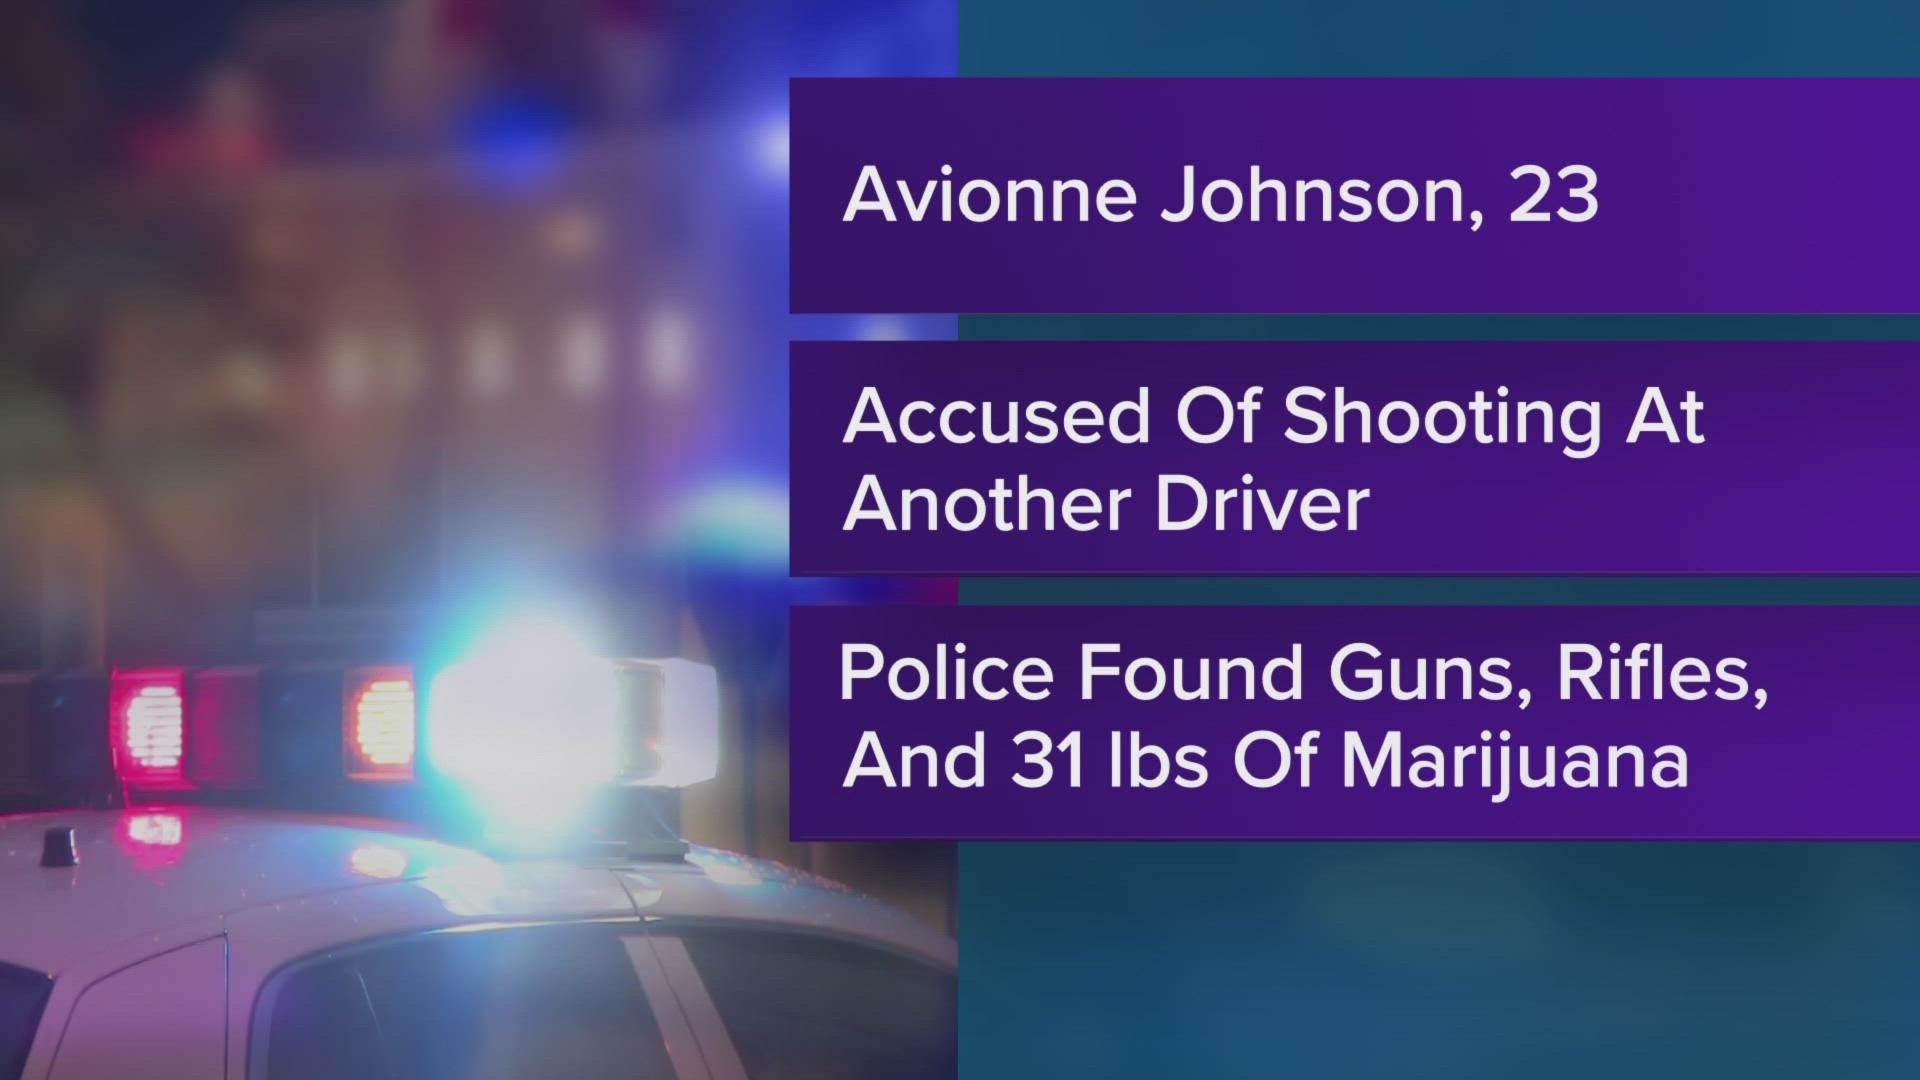 Police say 23-year-old Avionne Johnson got into an argument with another driver on I-69 near 106th street when he pulled a gun and fired two shots.